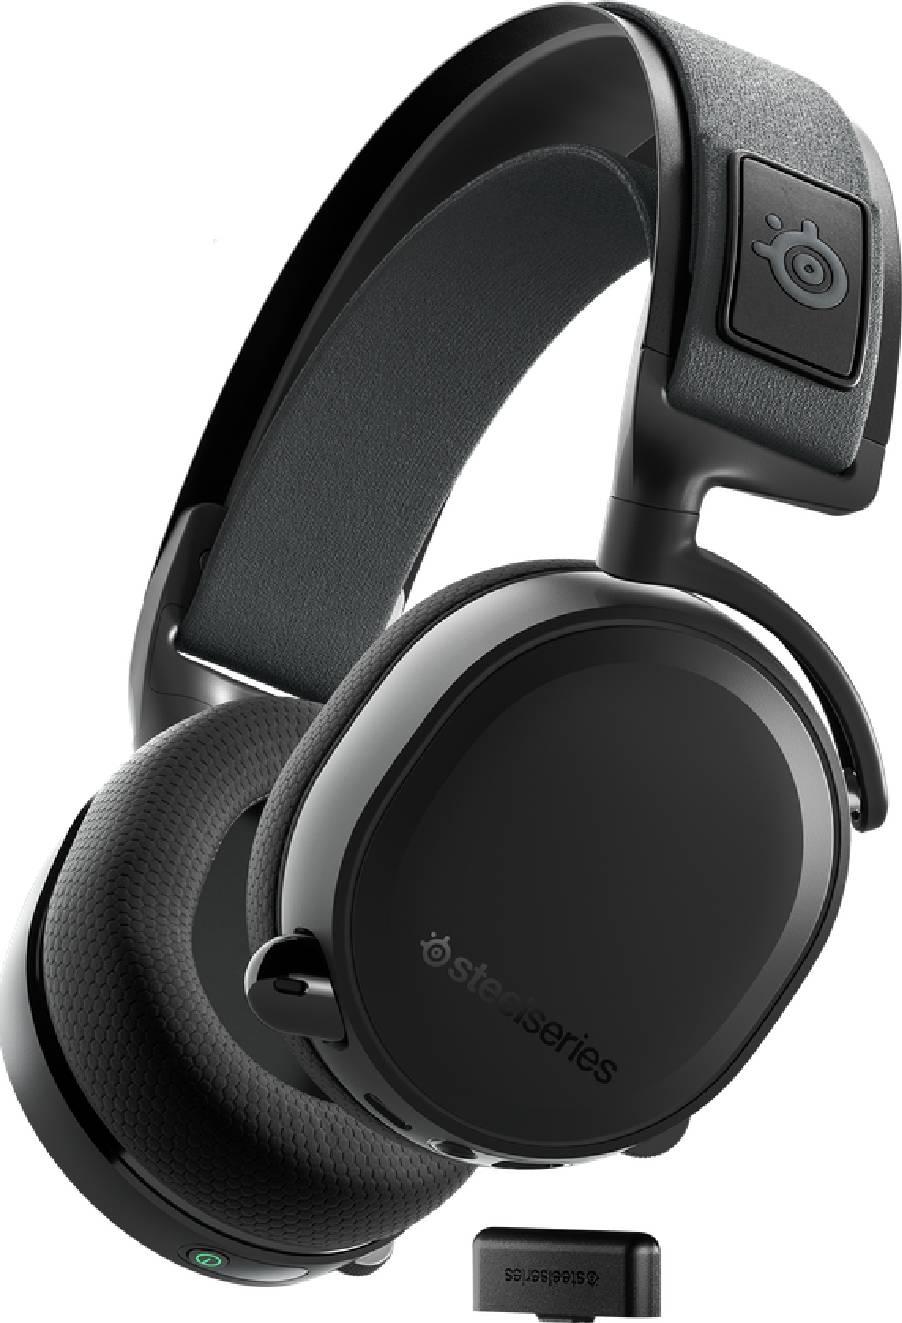 SteelSeries Arctis 7+ Wireless Gaming Headset Lossless 2.4 GHz 30 Hour Battery Life USB-C Charging 7.1 Surround For PC / PS5 / PS4 / Mac / Android Black | 61470